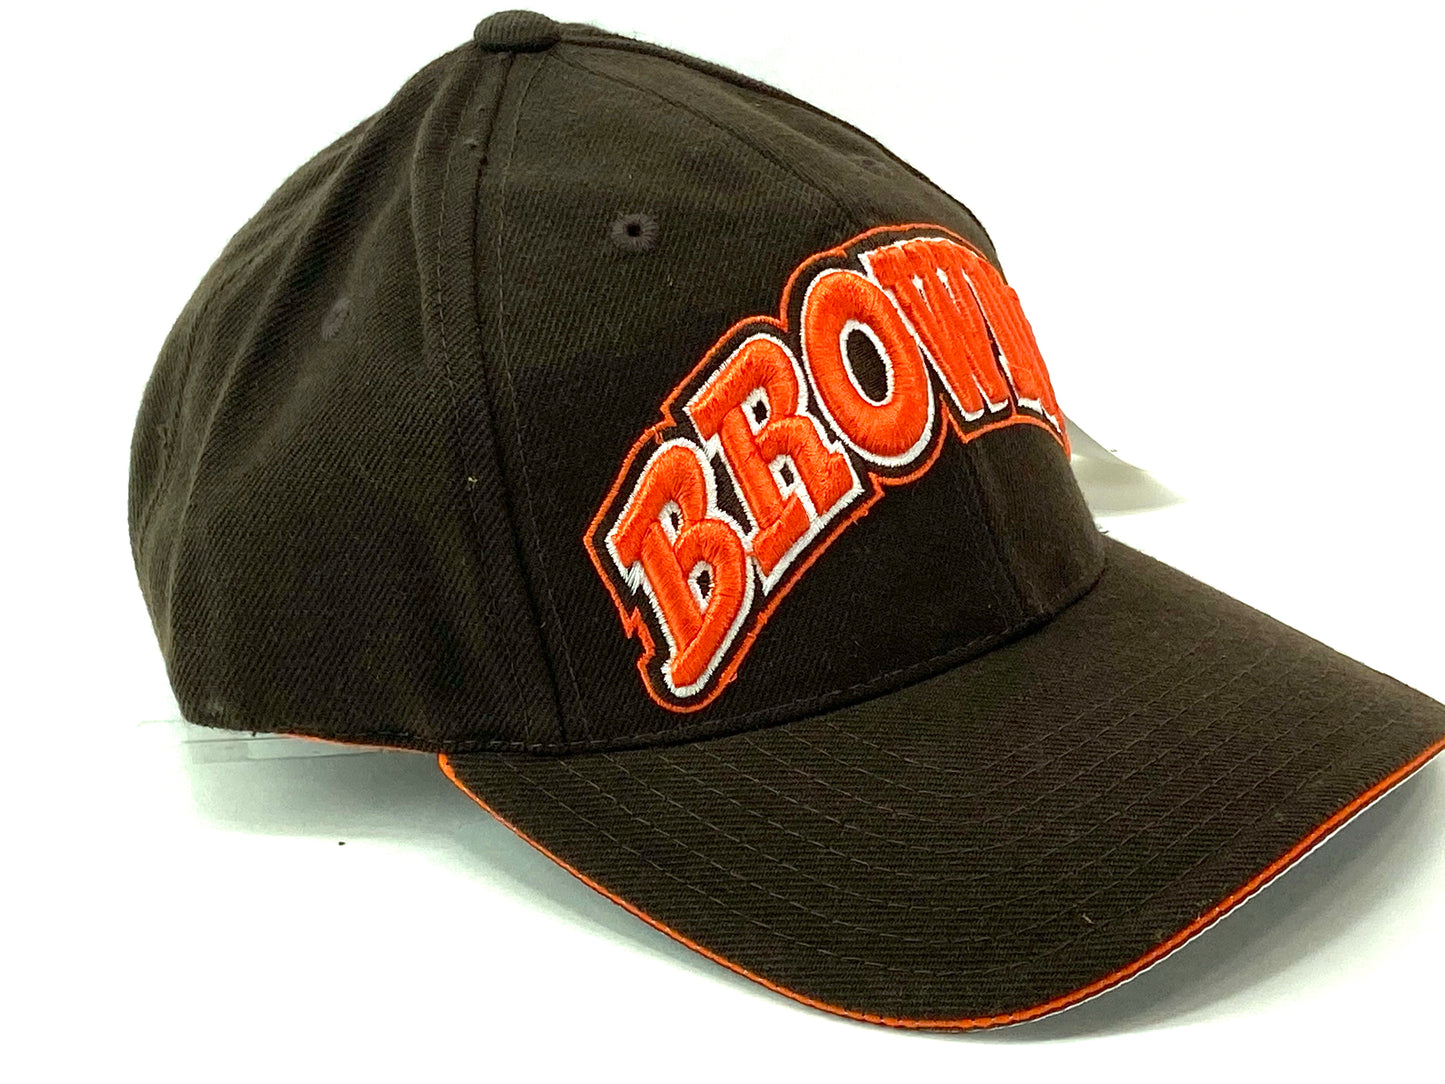 Cleveland Browns Vintage NFL 20% Wool Block "BROWNS" Cap By American Needle